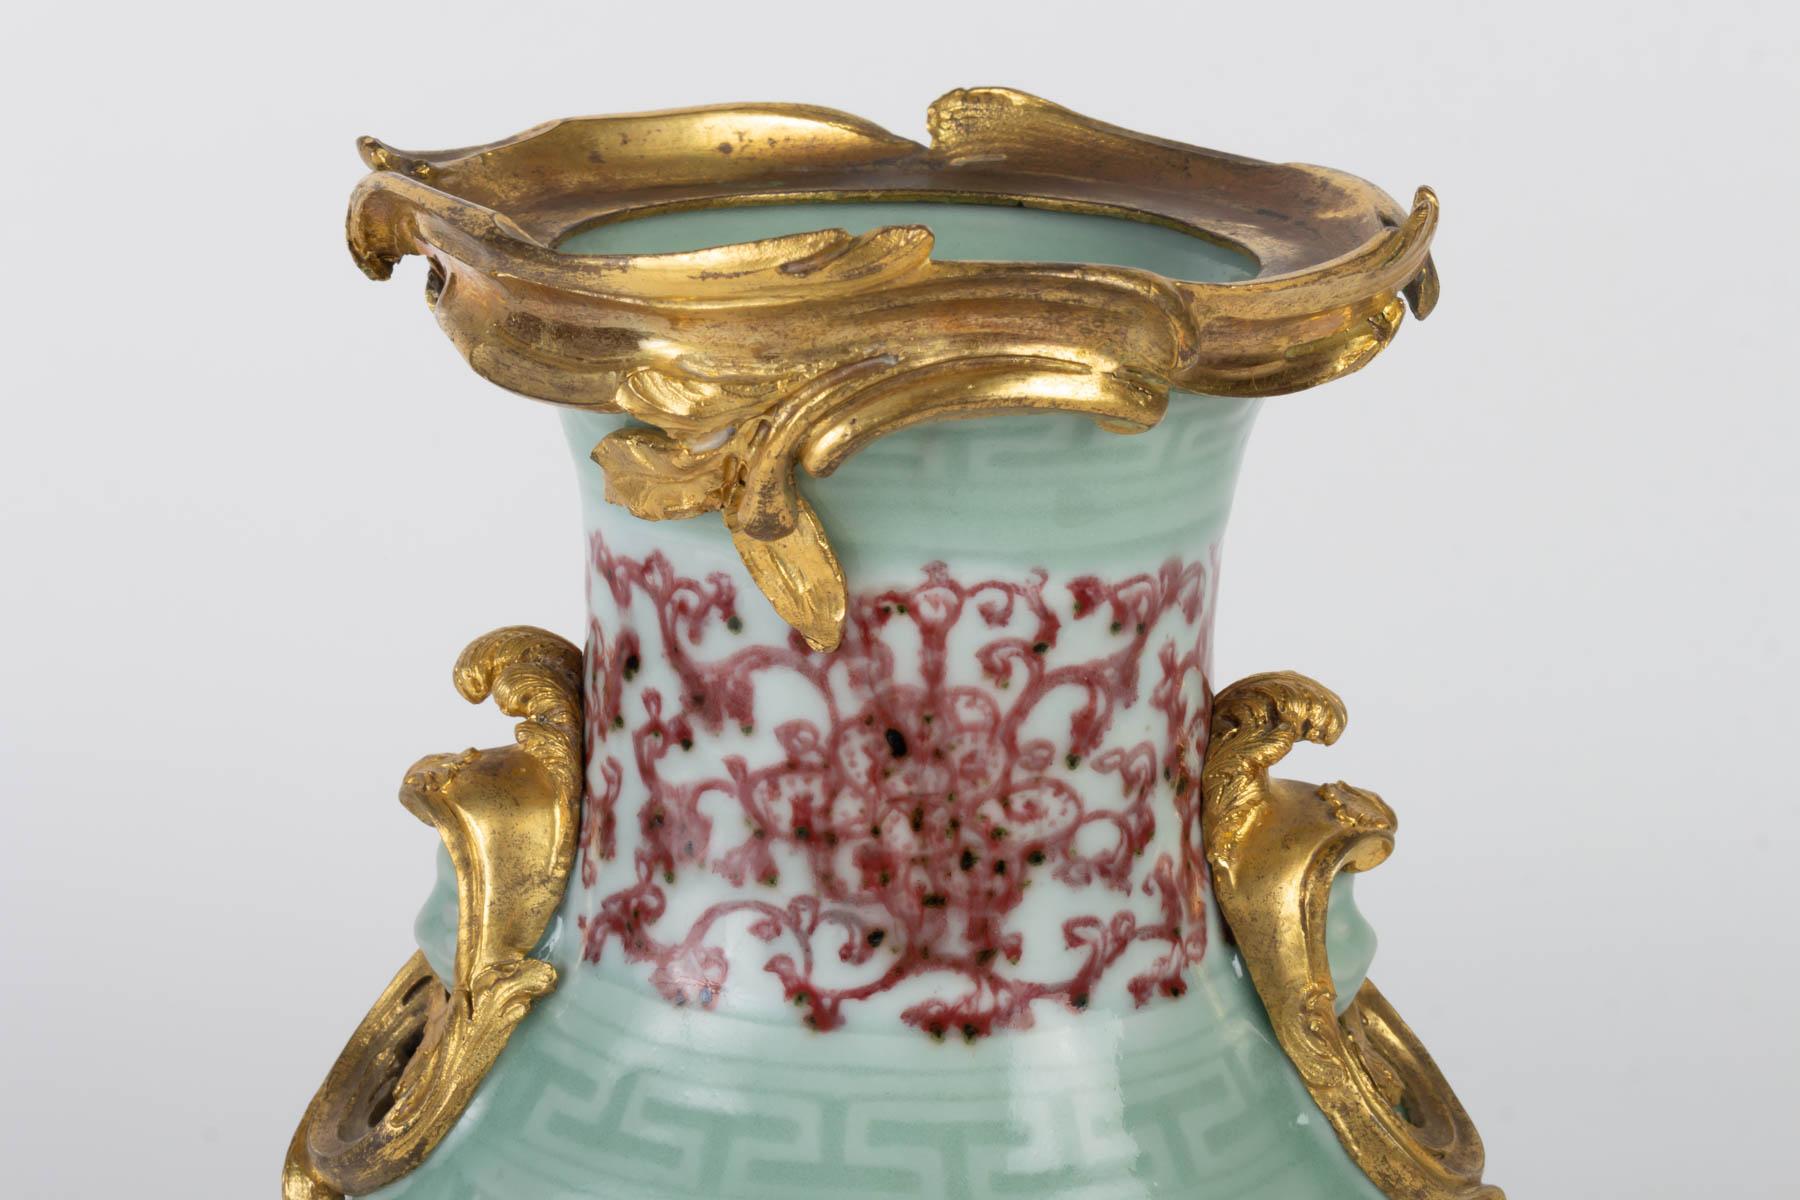 Mounted porcelain vase of gilt and chiselled bronze, 18th century, Qianlong period, signature of the period.
Measures: H 30cm, W 16cm, D 14cm.